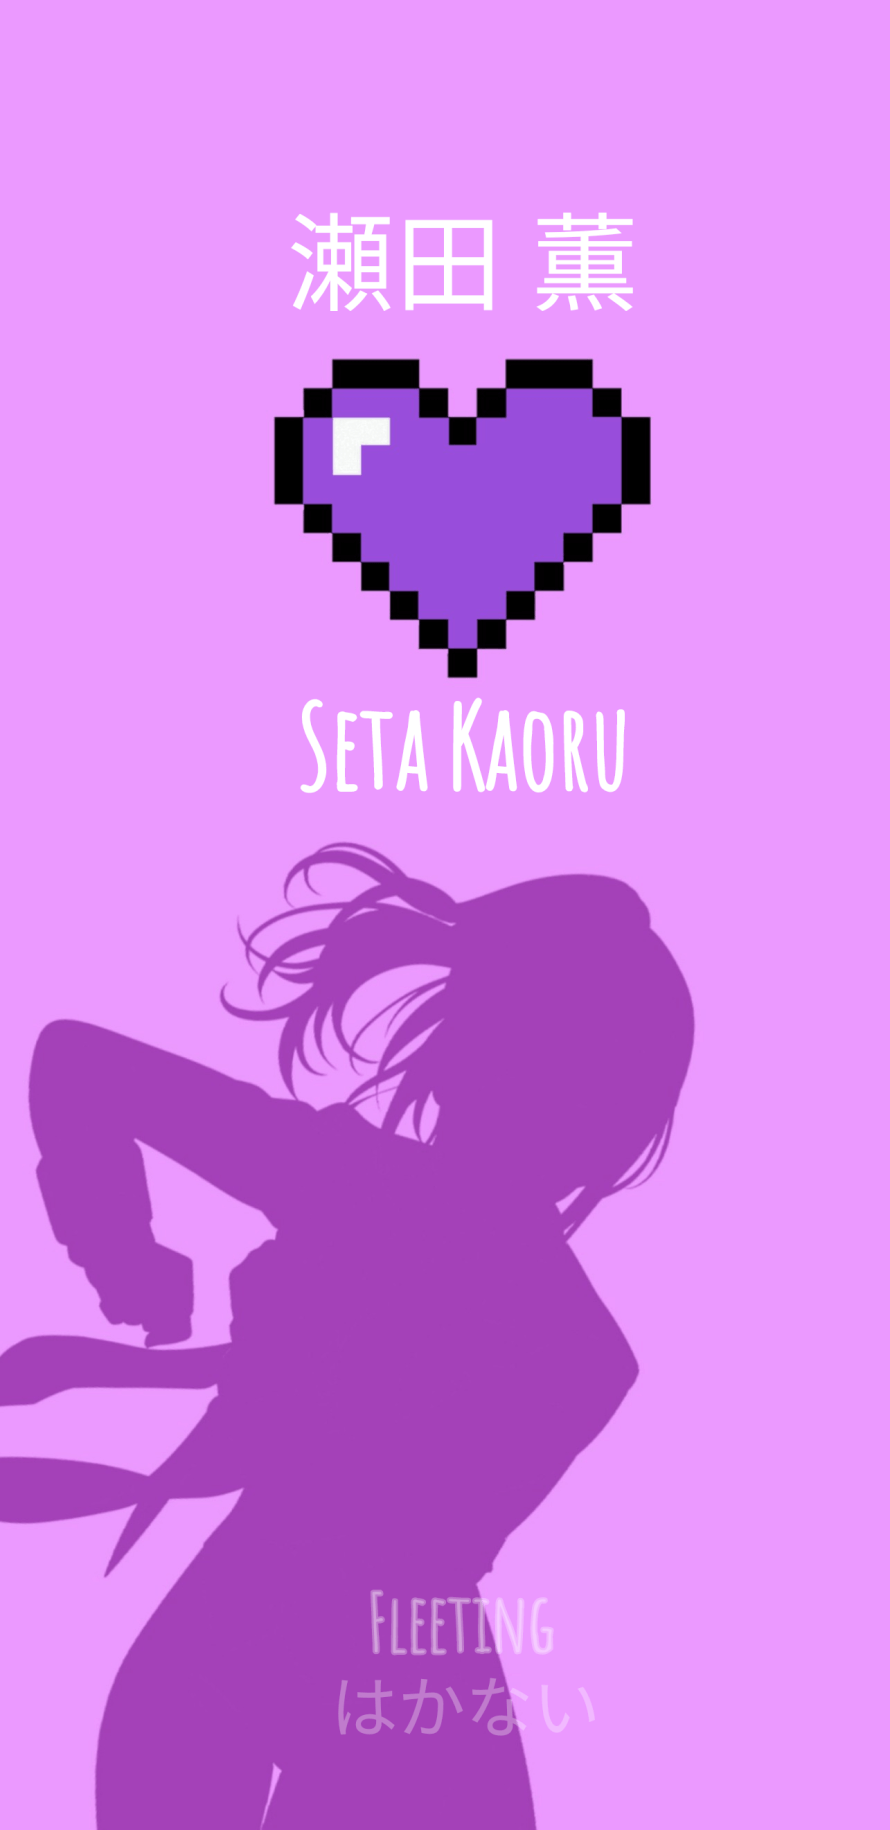 So White Day Kaoru's coming soon and I need to pray for Kaoru. This background that I made on...